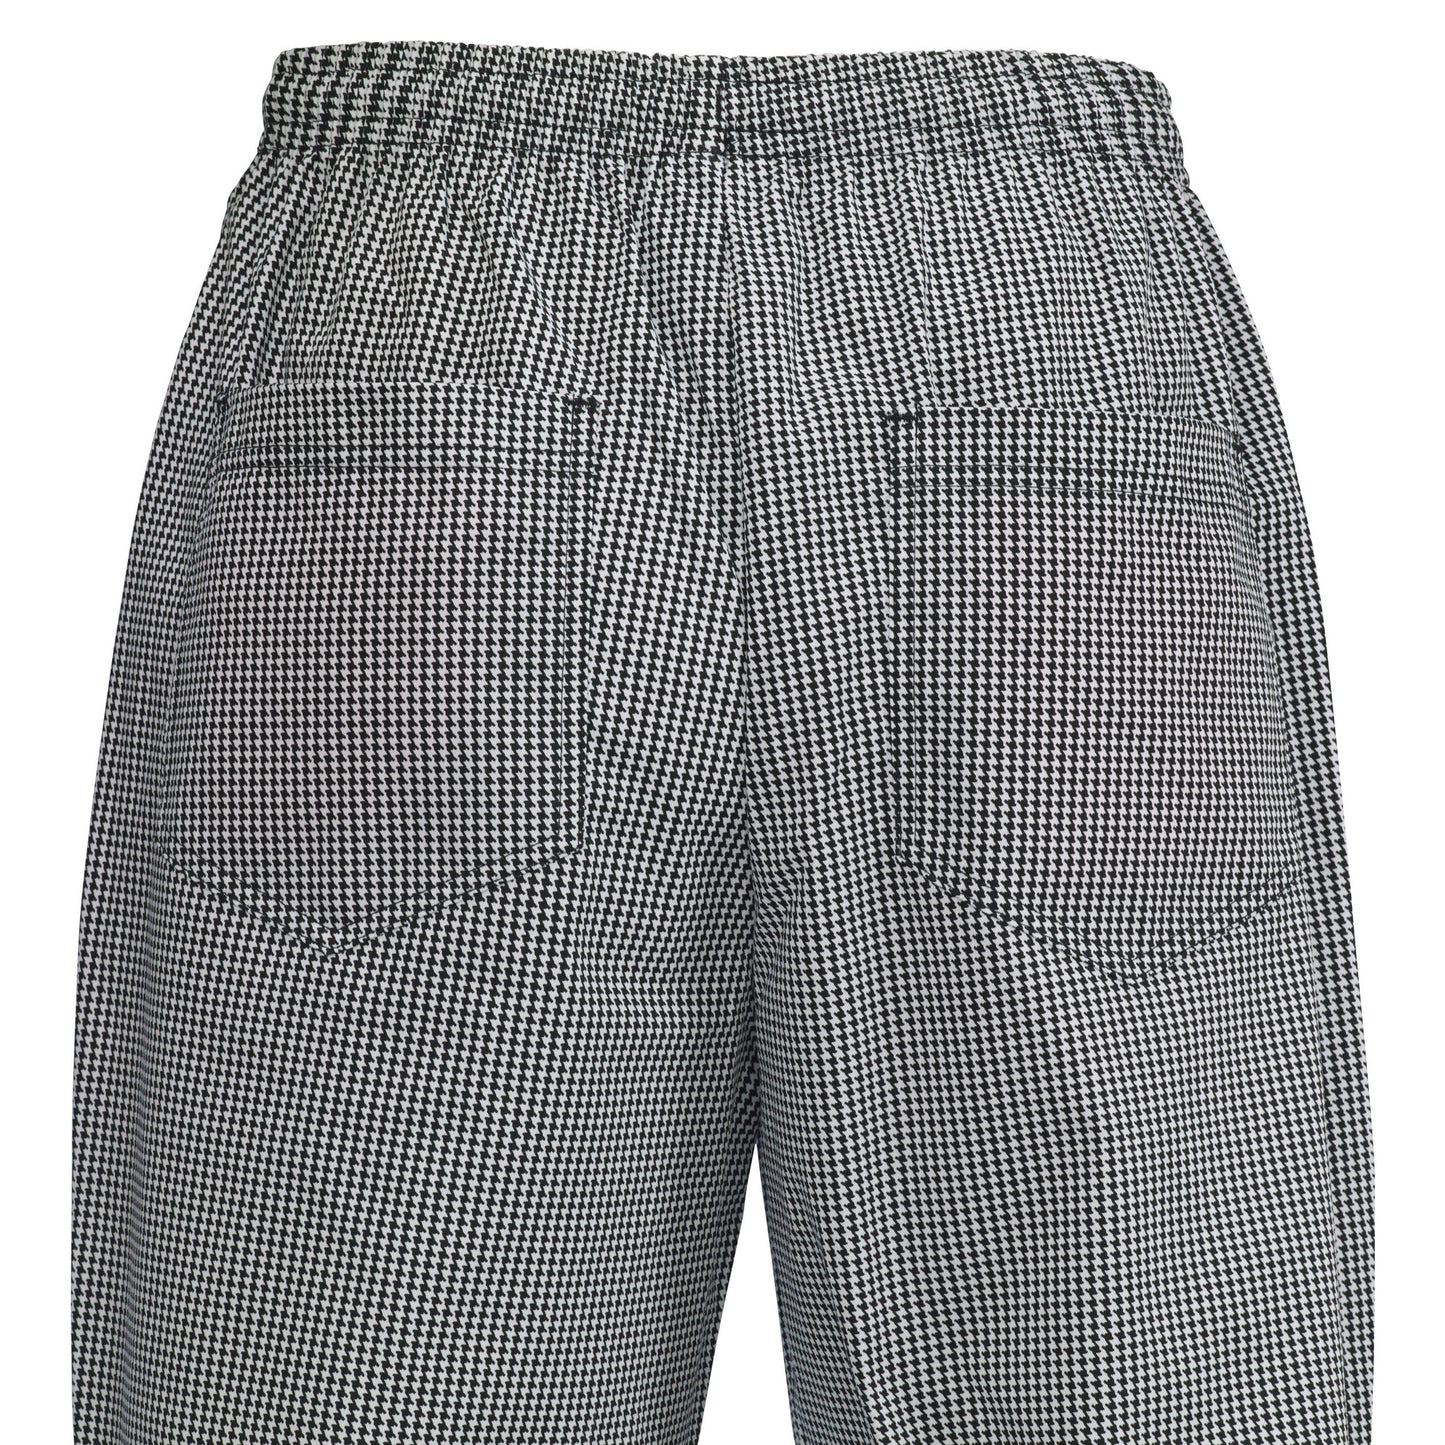 Chef Pants, Houndstooth - Large